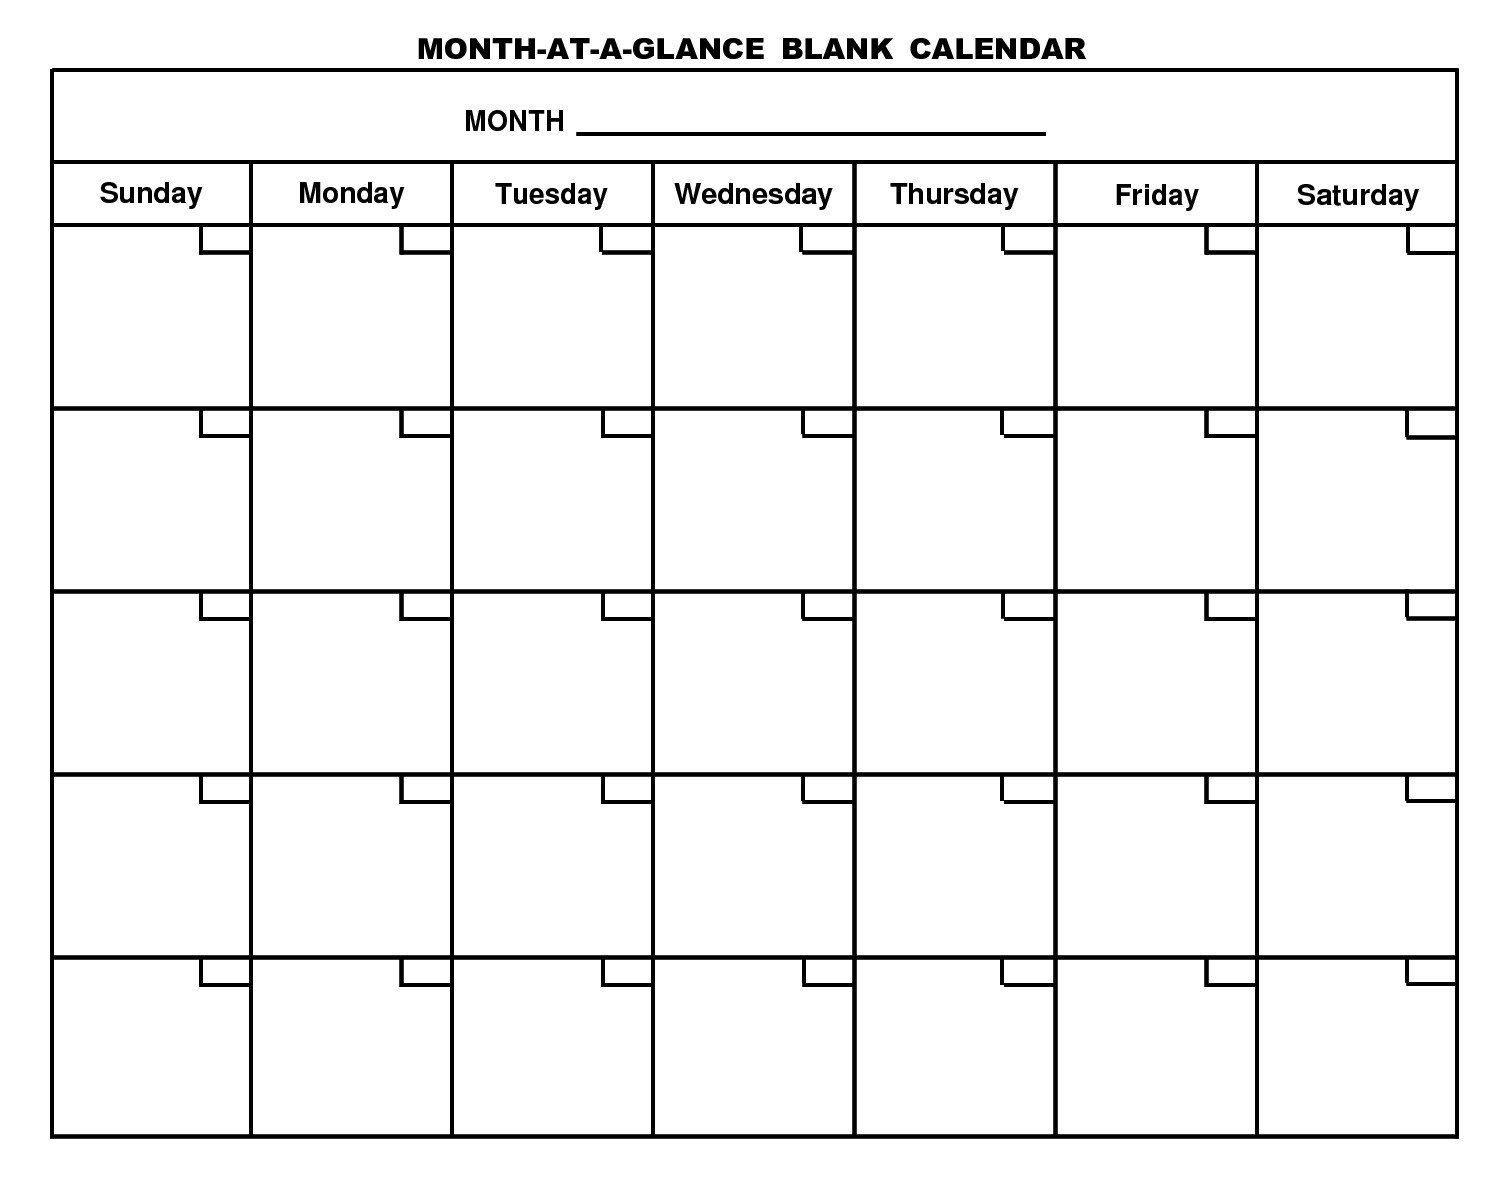 Blank One Month Calendar Template - Free Calendar Collection with regard to Free One Month Schedule Templates